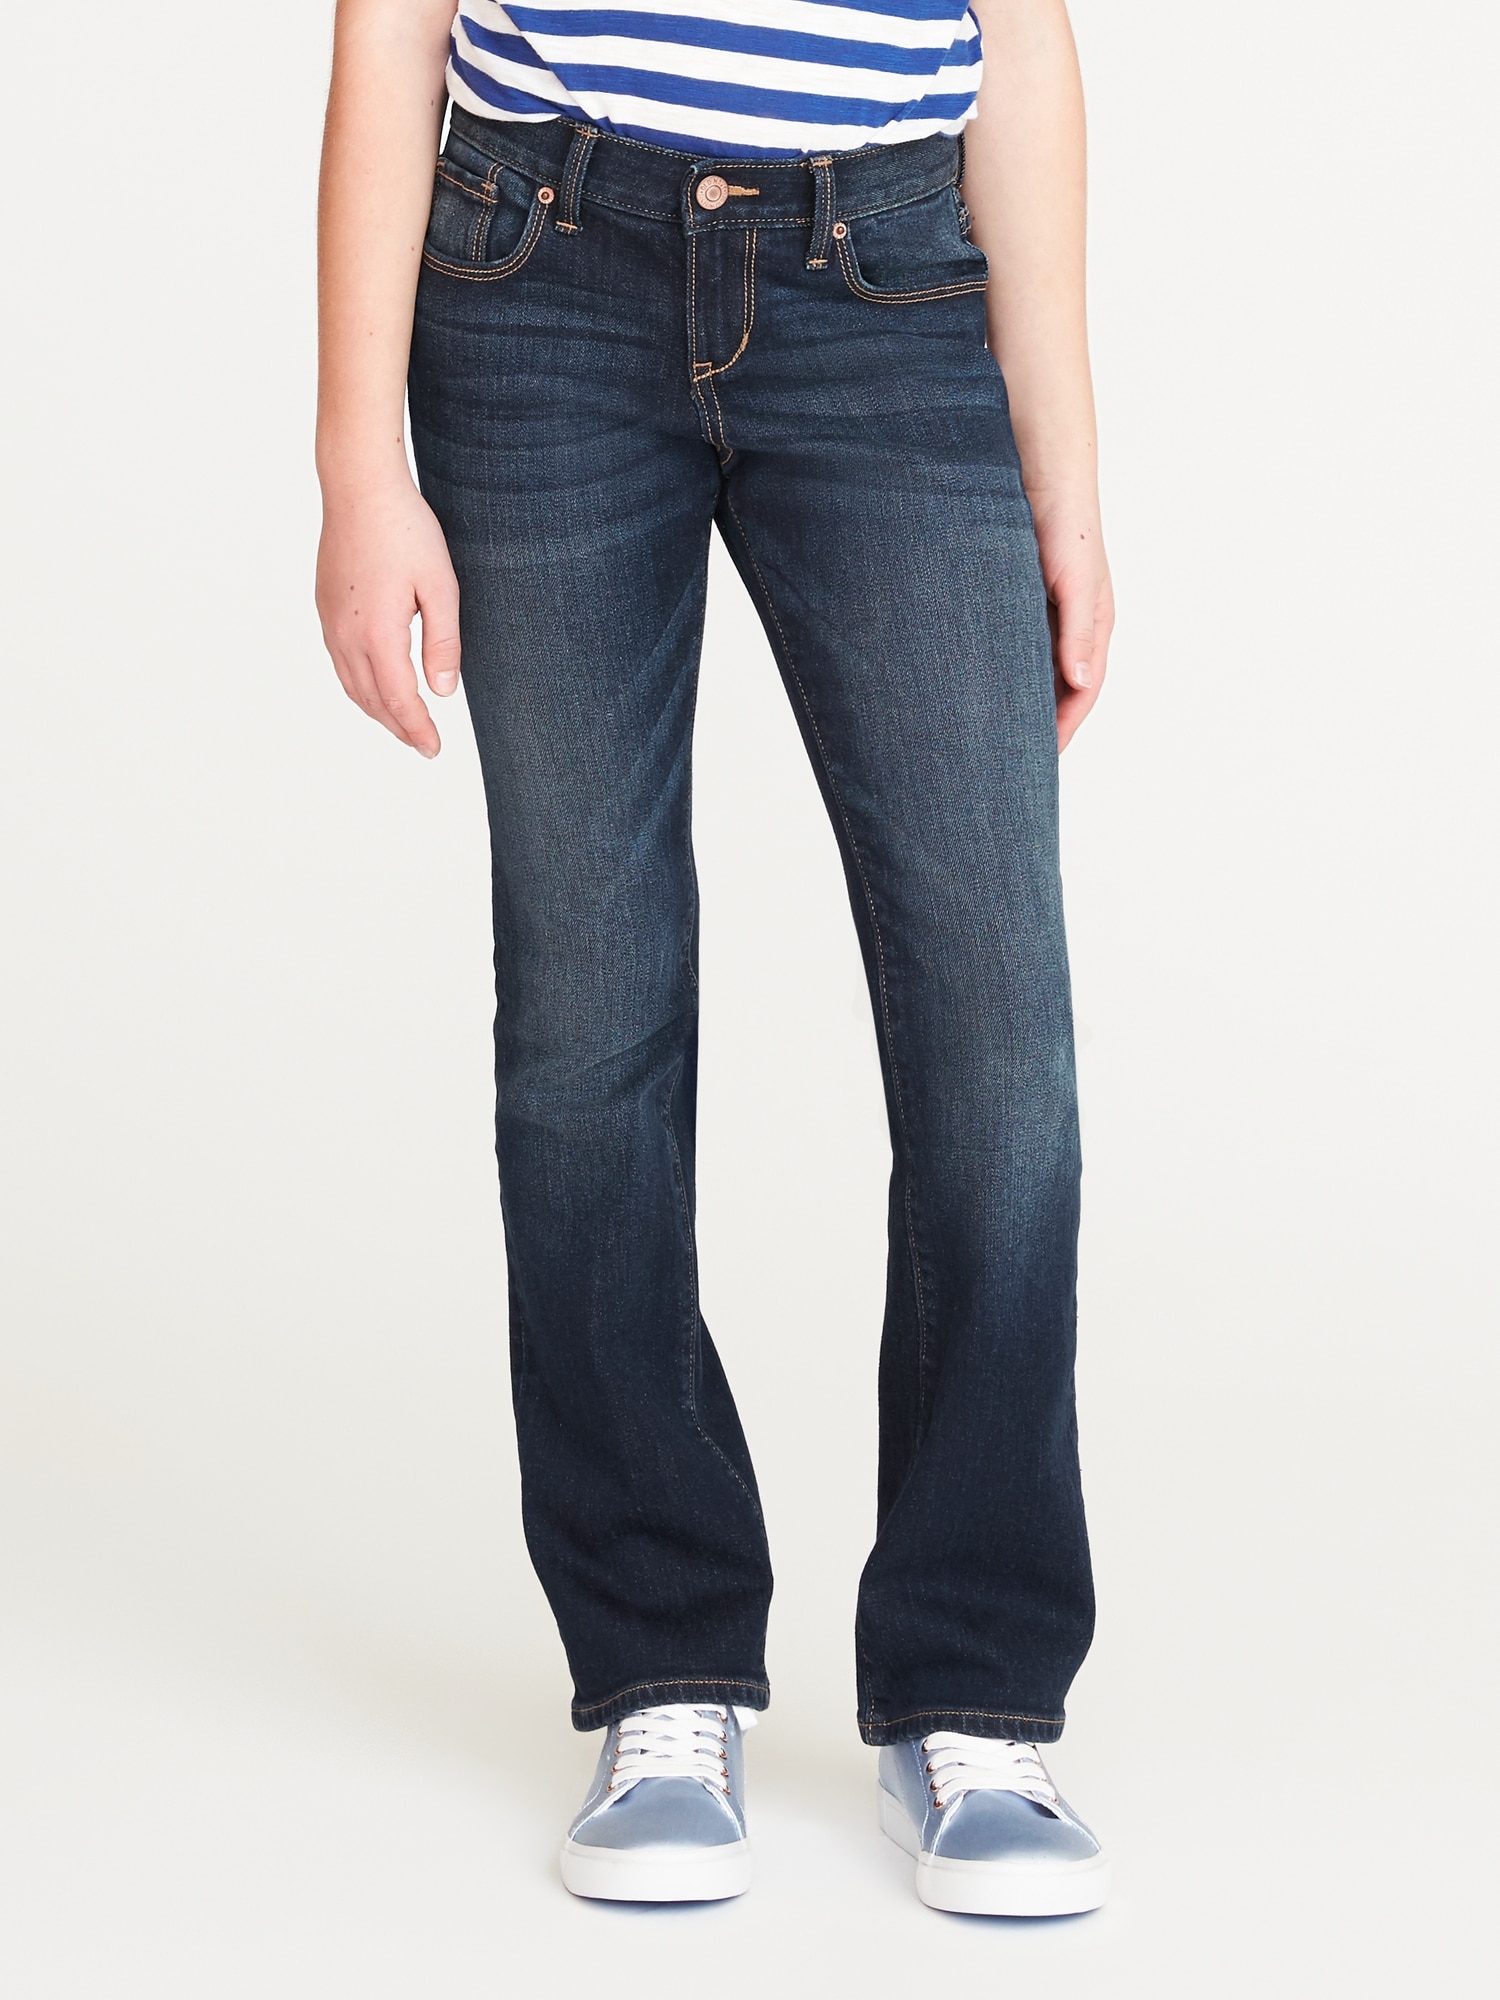 old navy jeans for girls